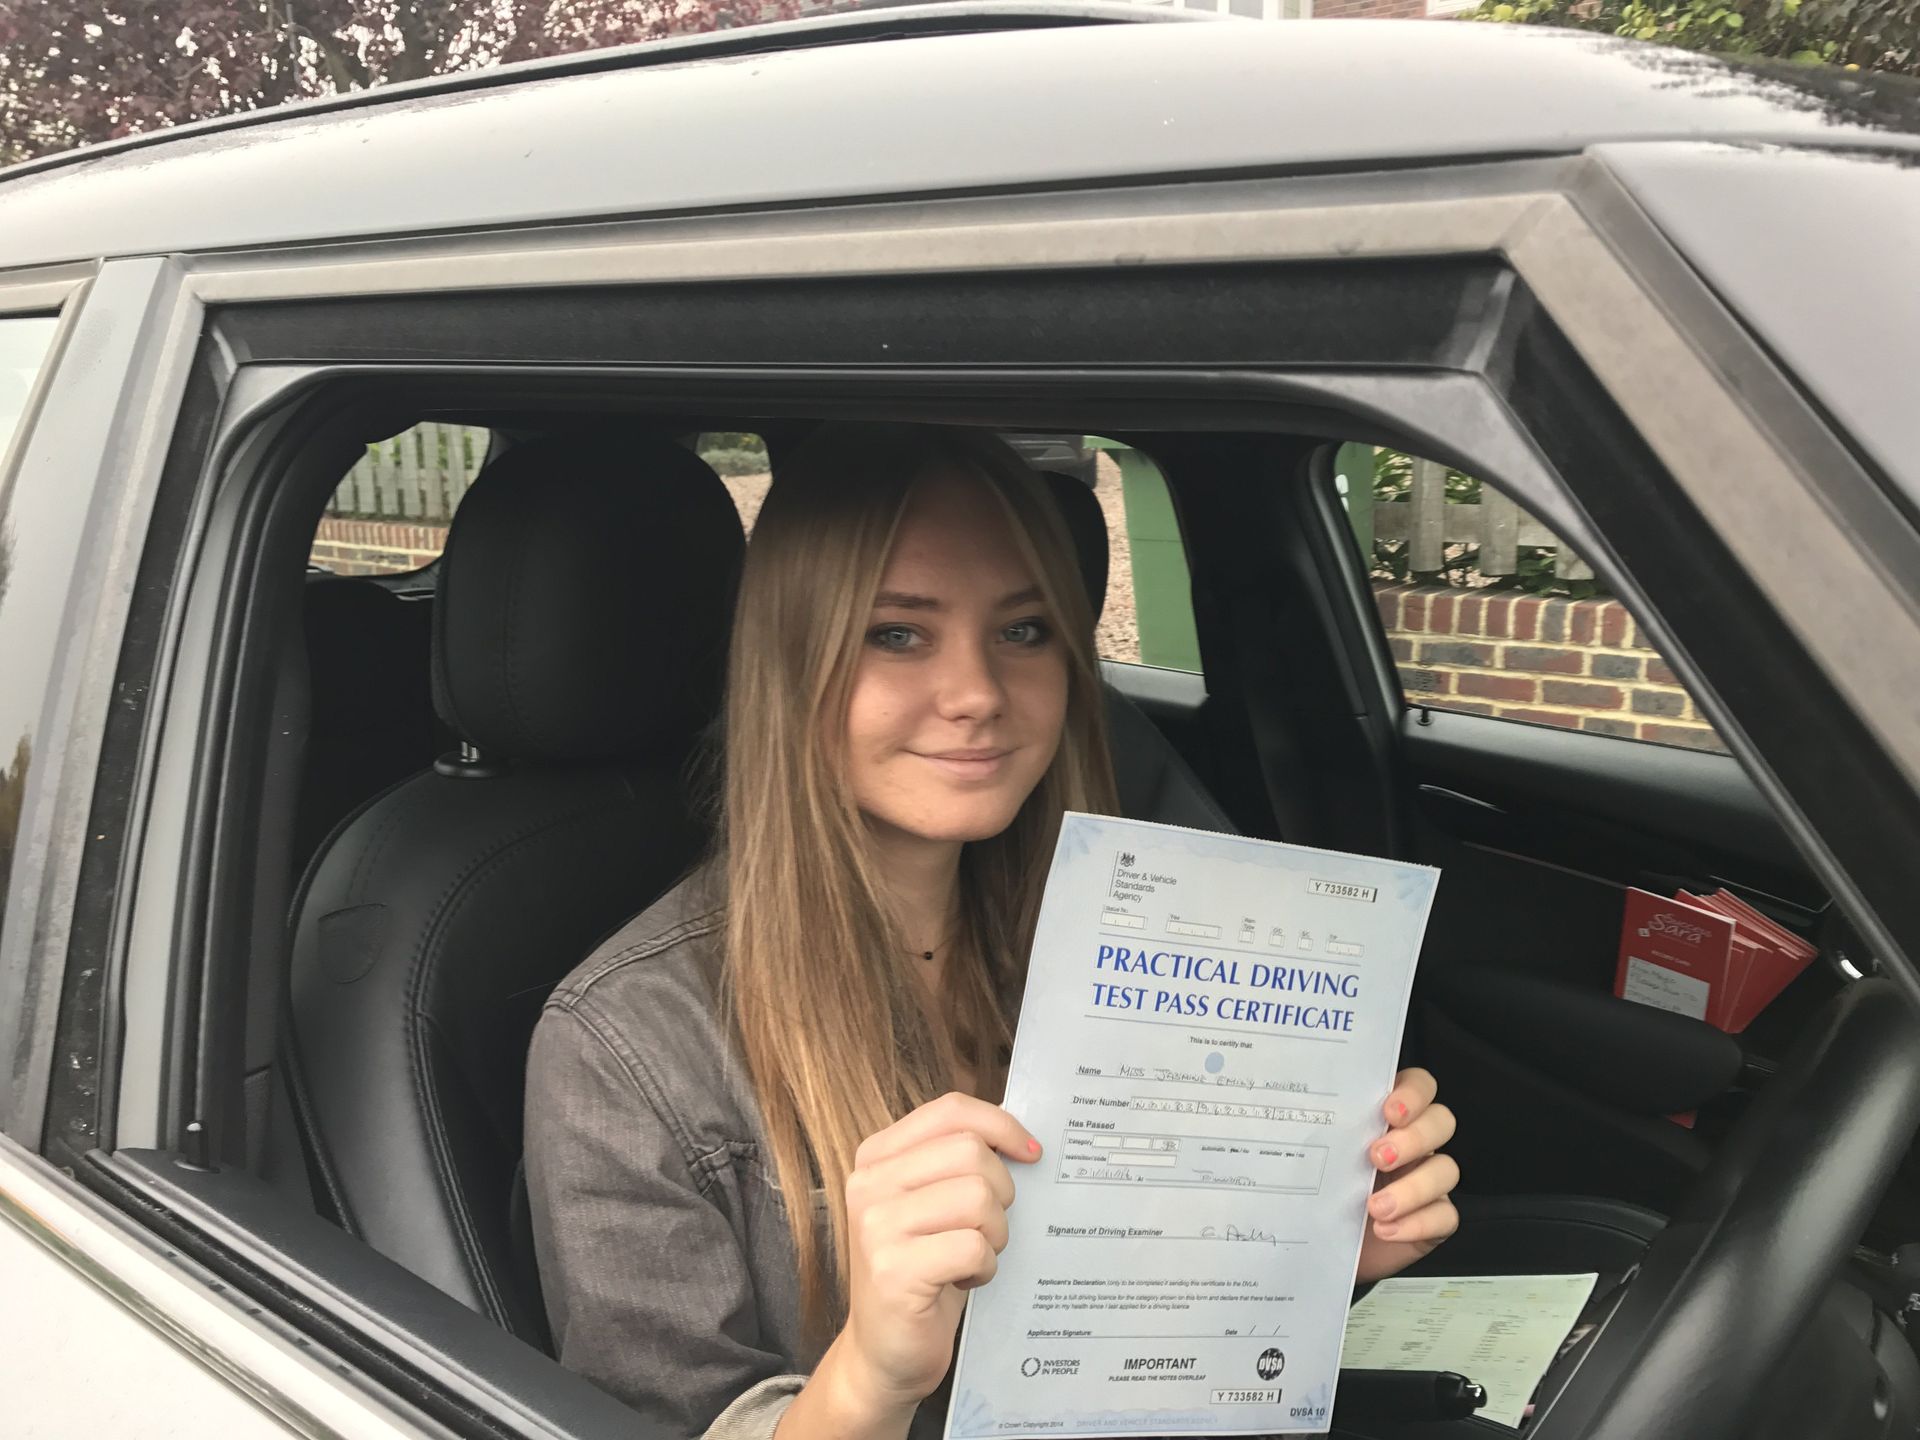 Driver training - Thames Ditton, Surrey - Success With Sara - passed